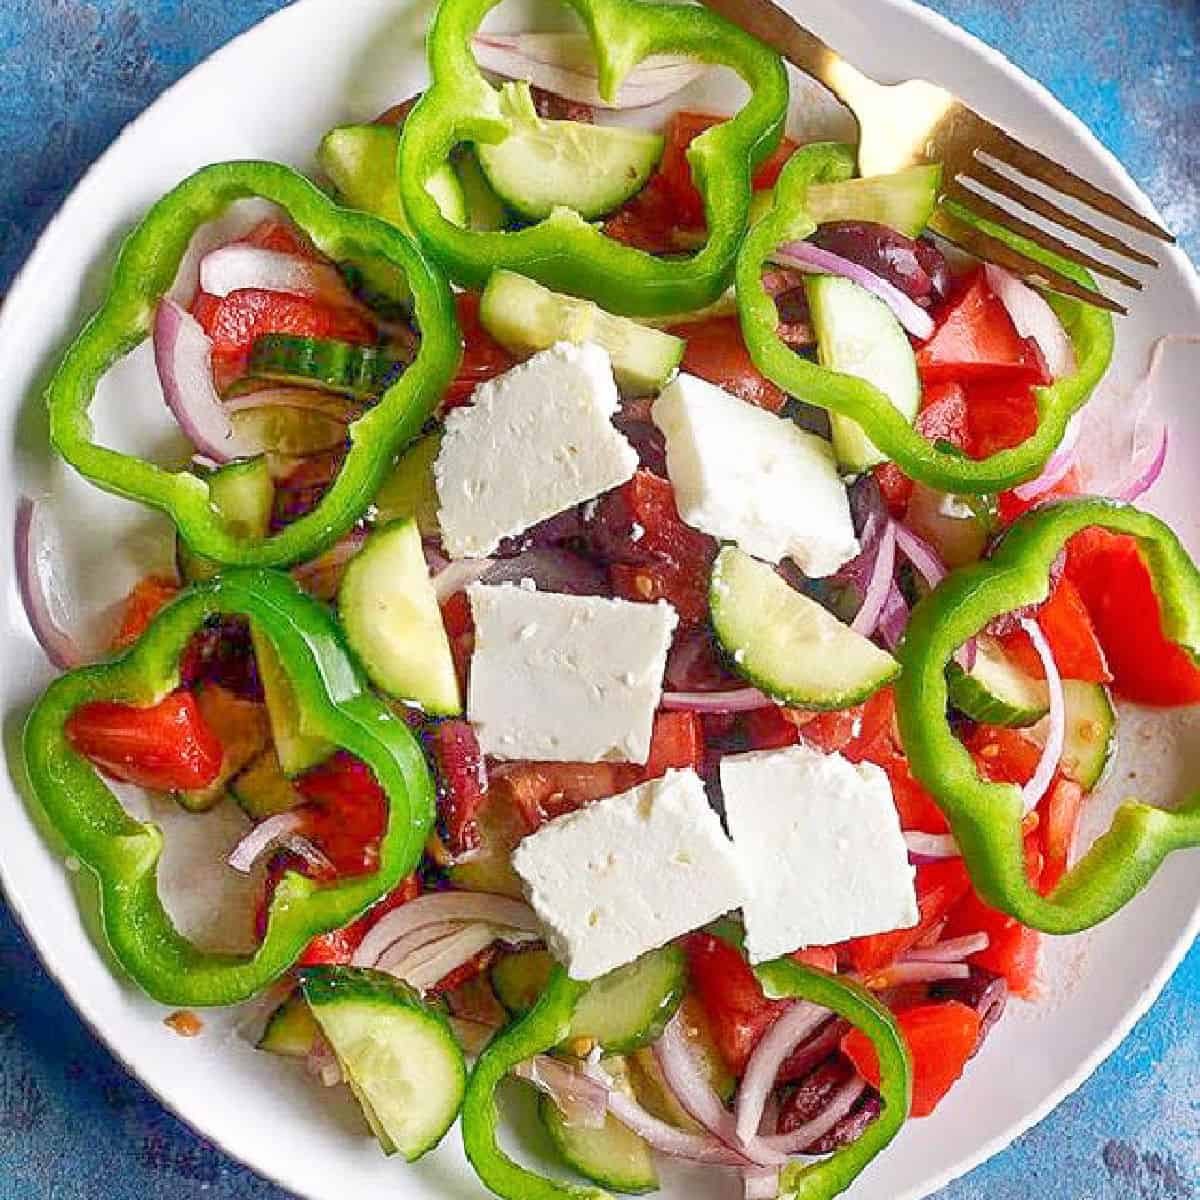 Here is a traditional Greek salad recipe, requiring just a few ingredients. It's the perfect starter or side dish for a Mediterranean meal.